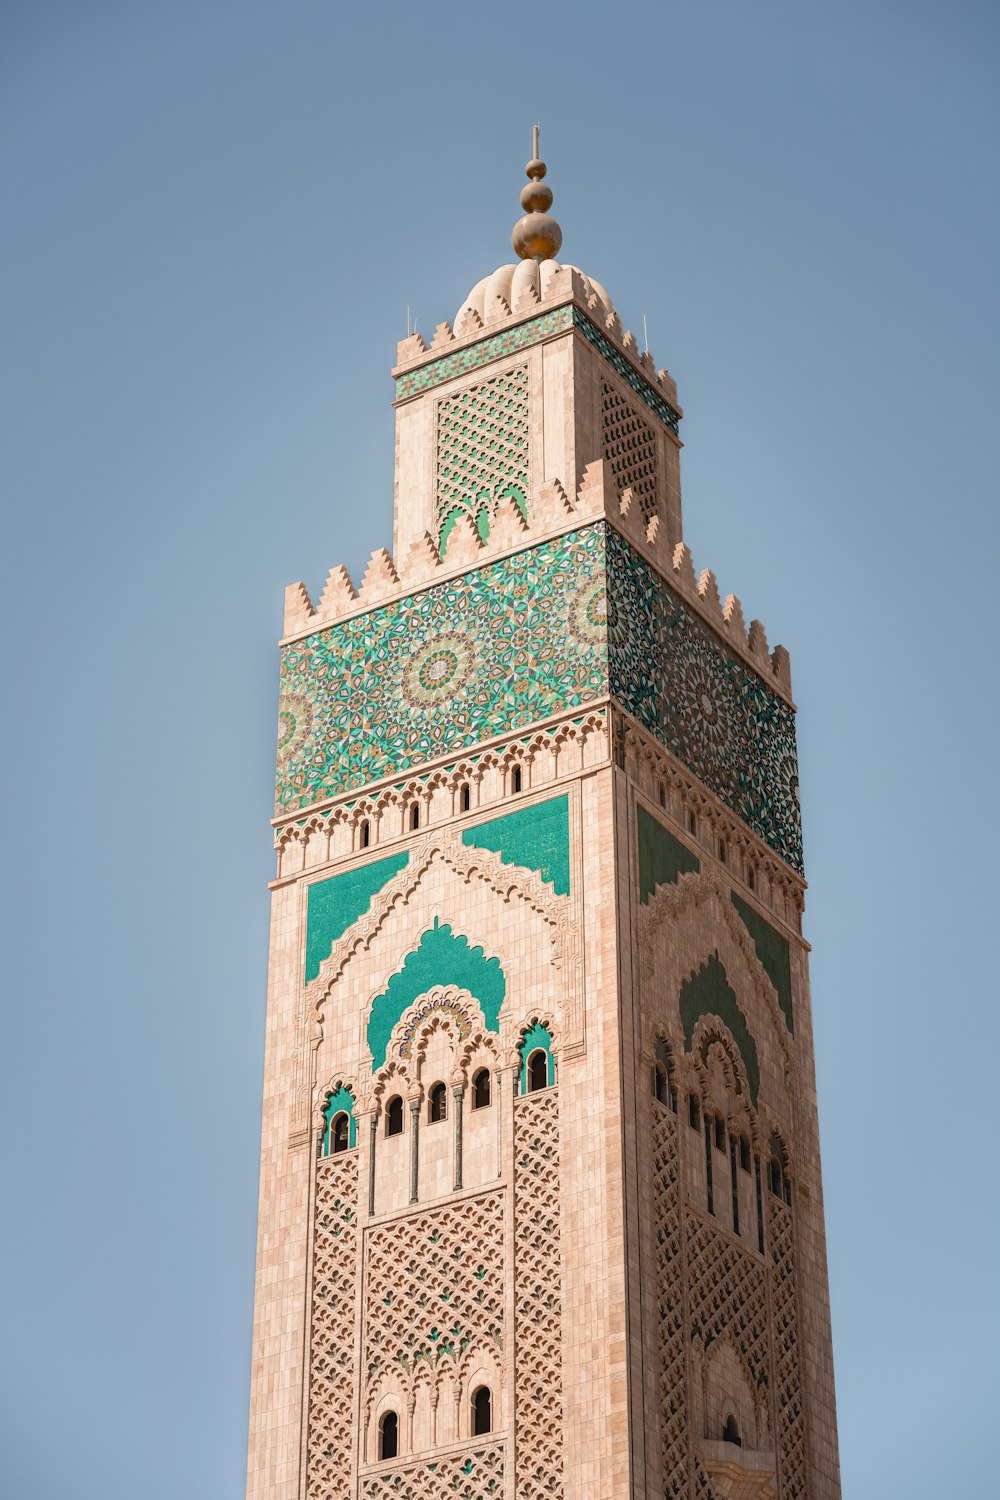 a tall tower with a green and white design on it